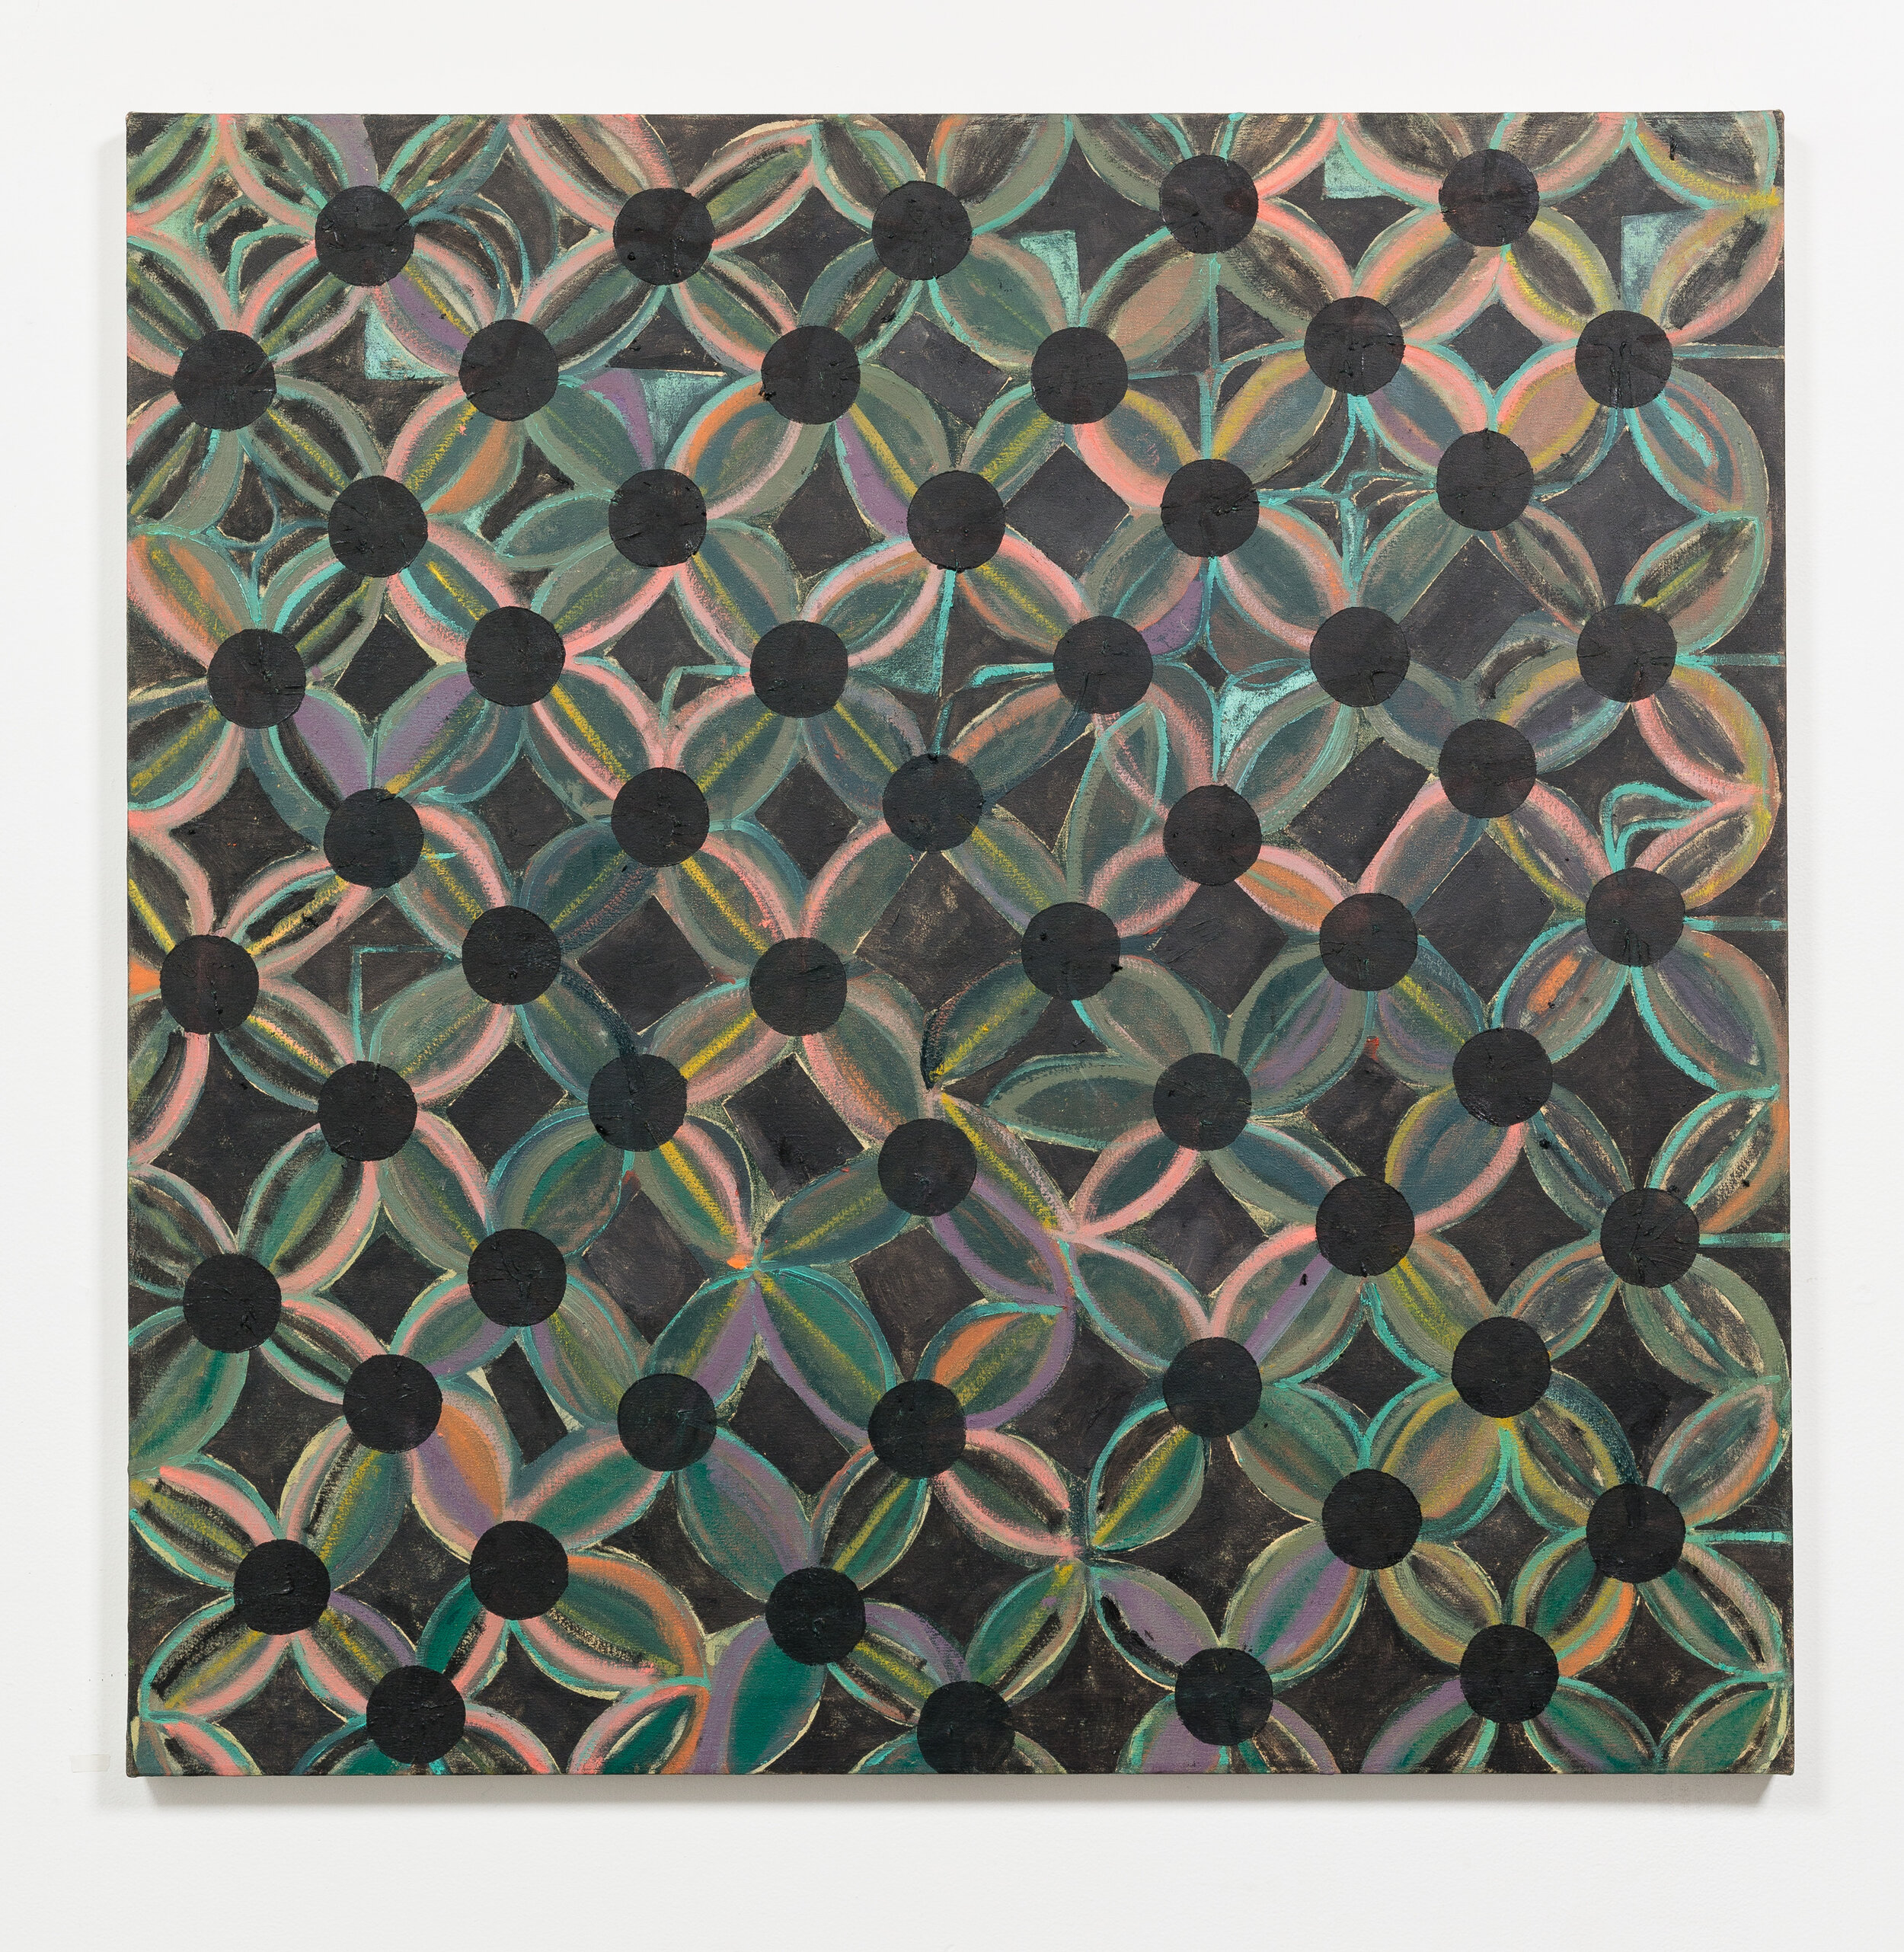 Snares, oil on canvas, 60" x 60", 2015